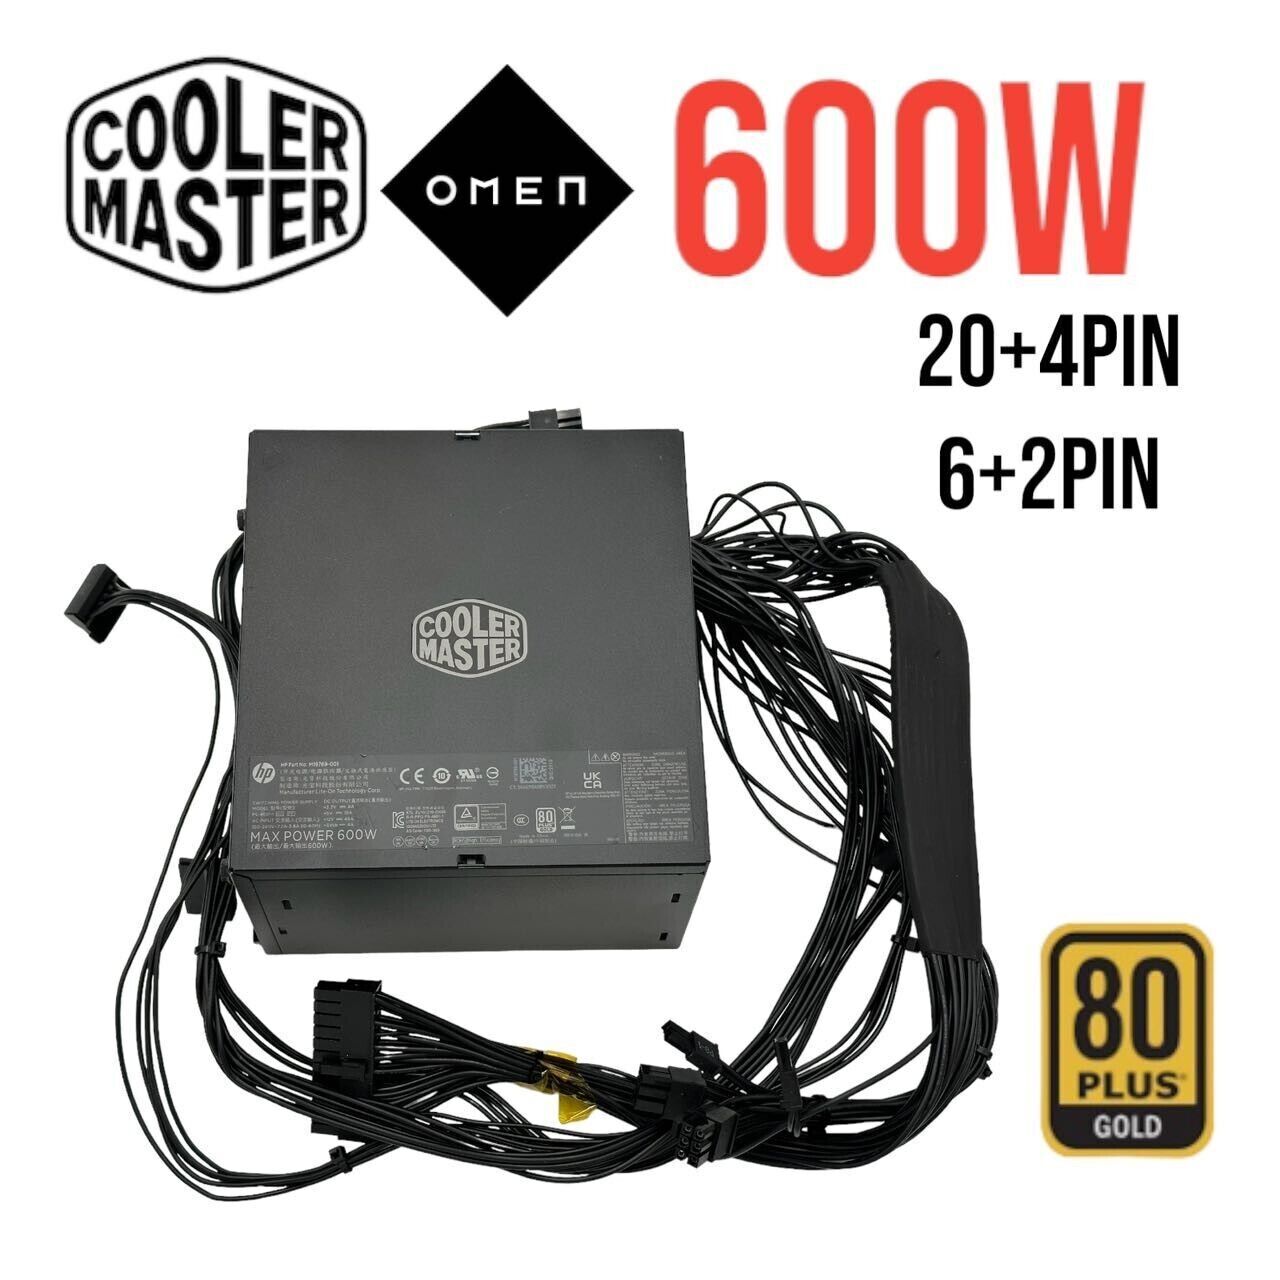 NEW Cooler Master 600 750 800W Gaming Power Supply 80Plus Gold Certified ATX PSU